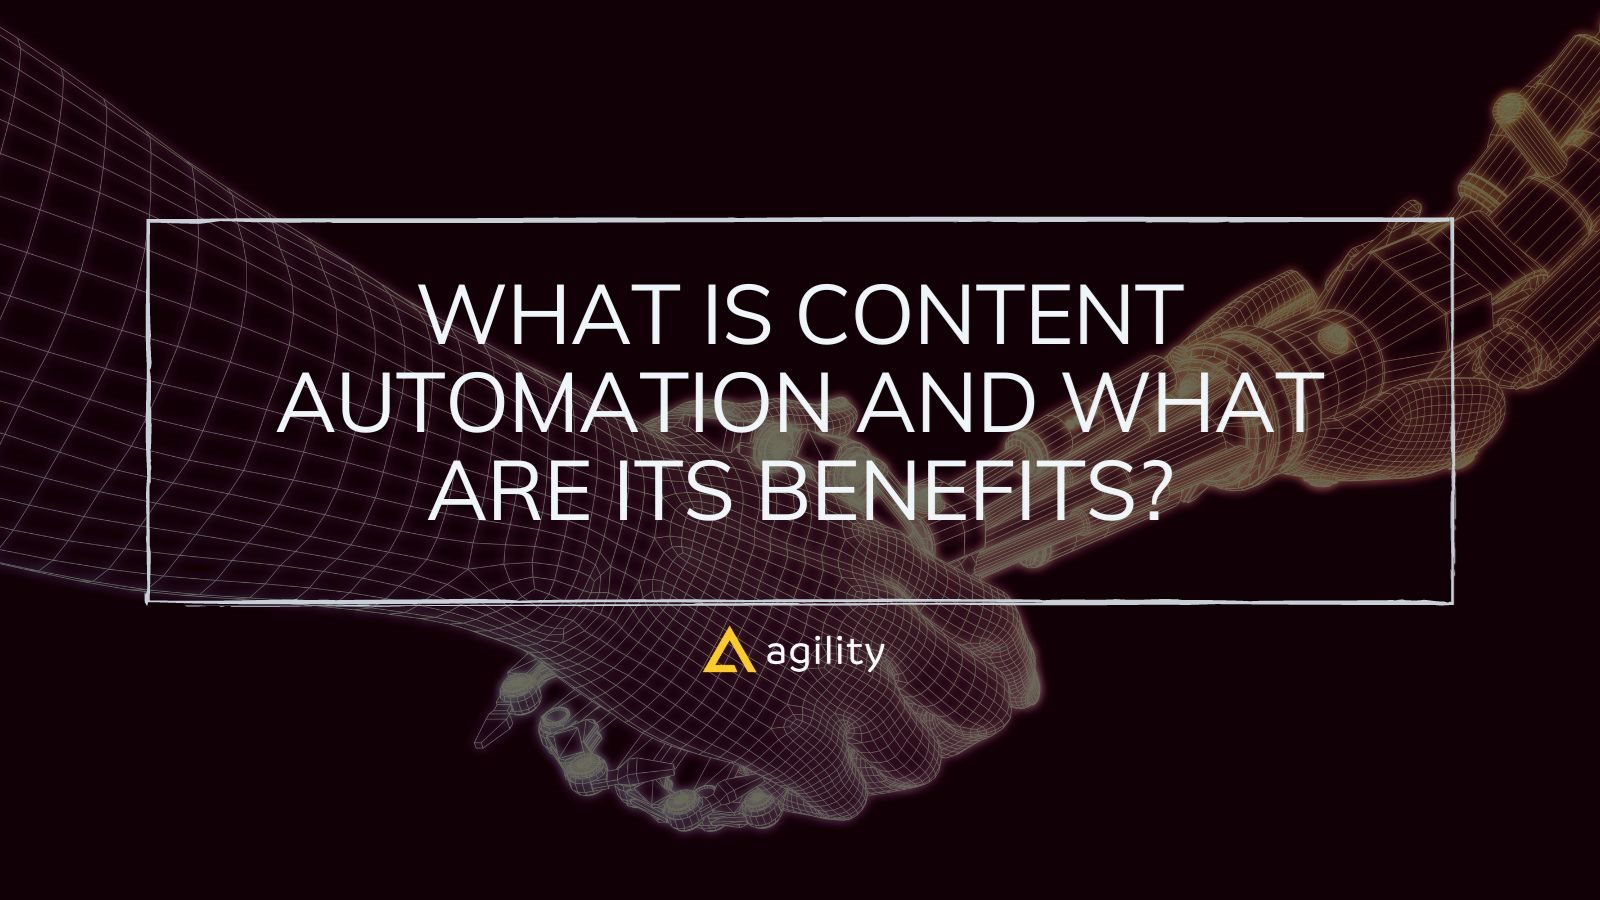 What Is Content Automation?